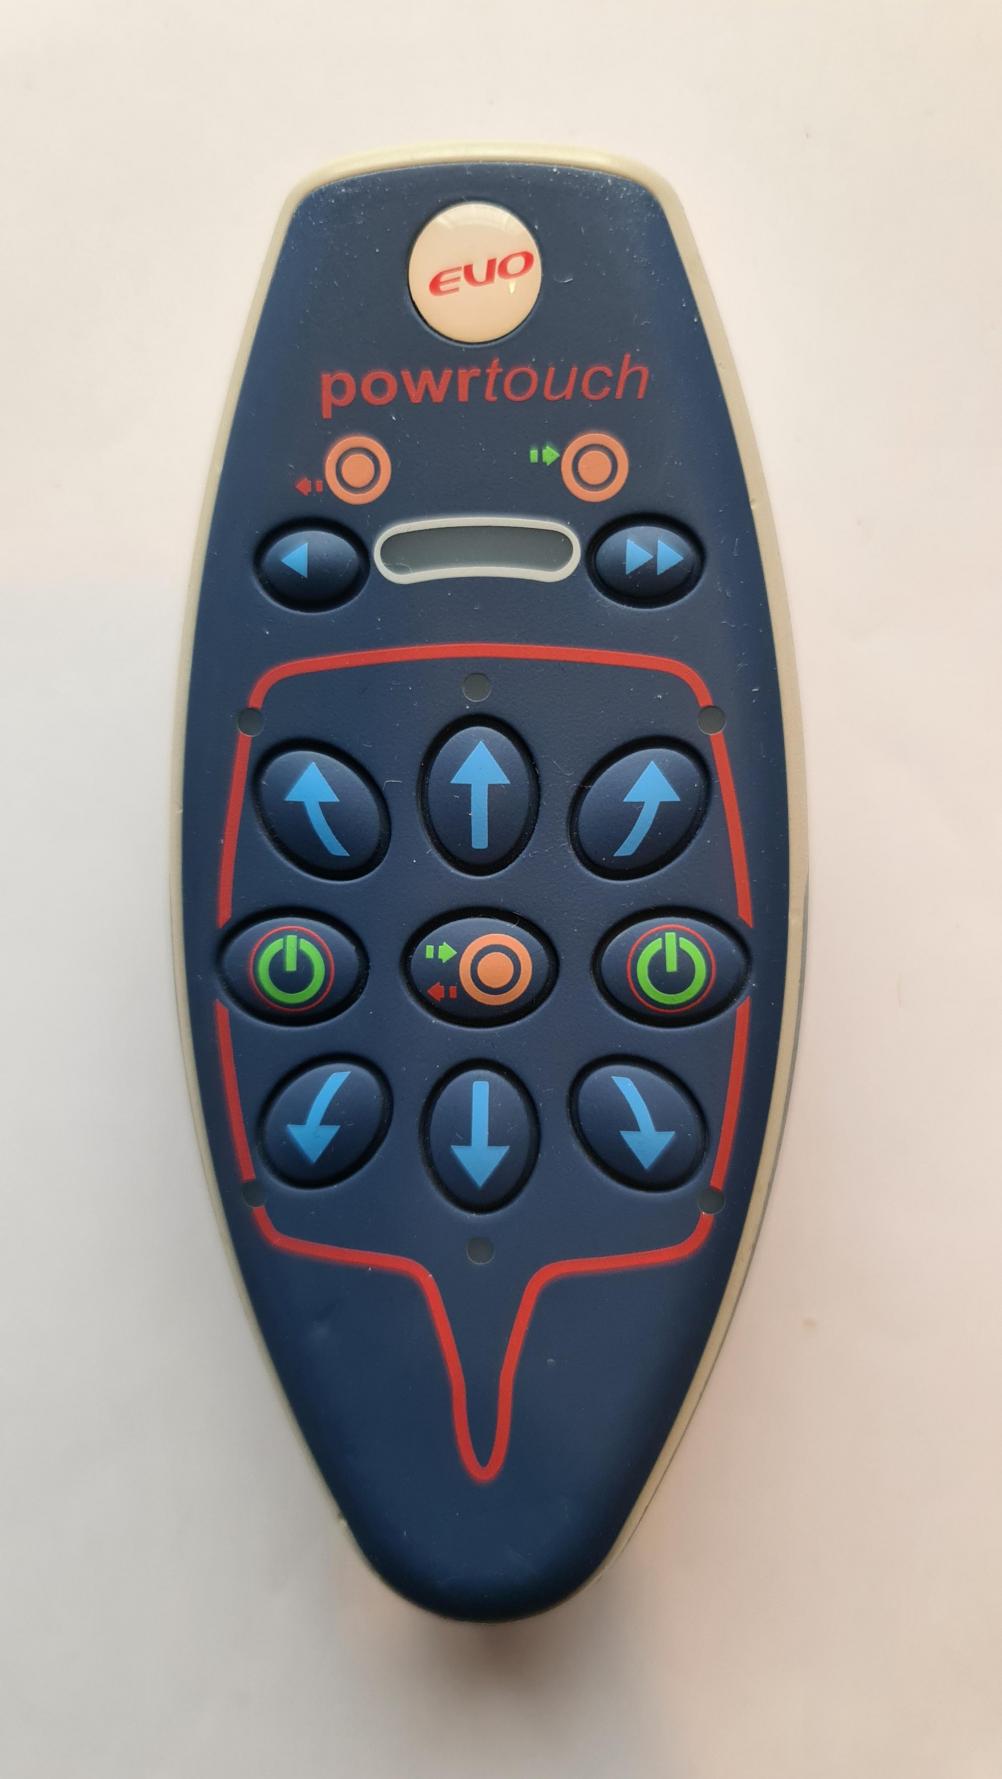 Powertouch Evo Remote Control - Front Image